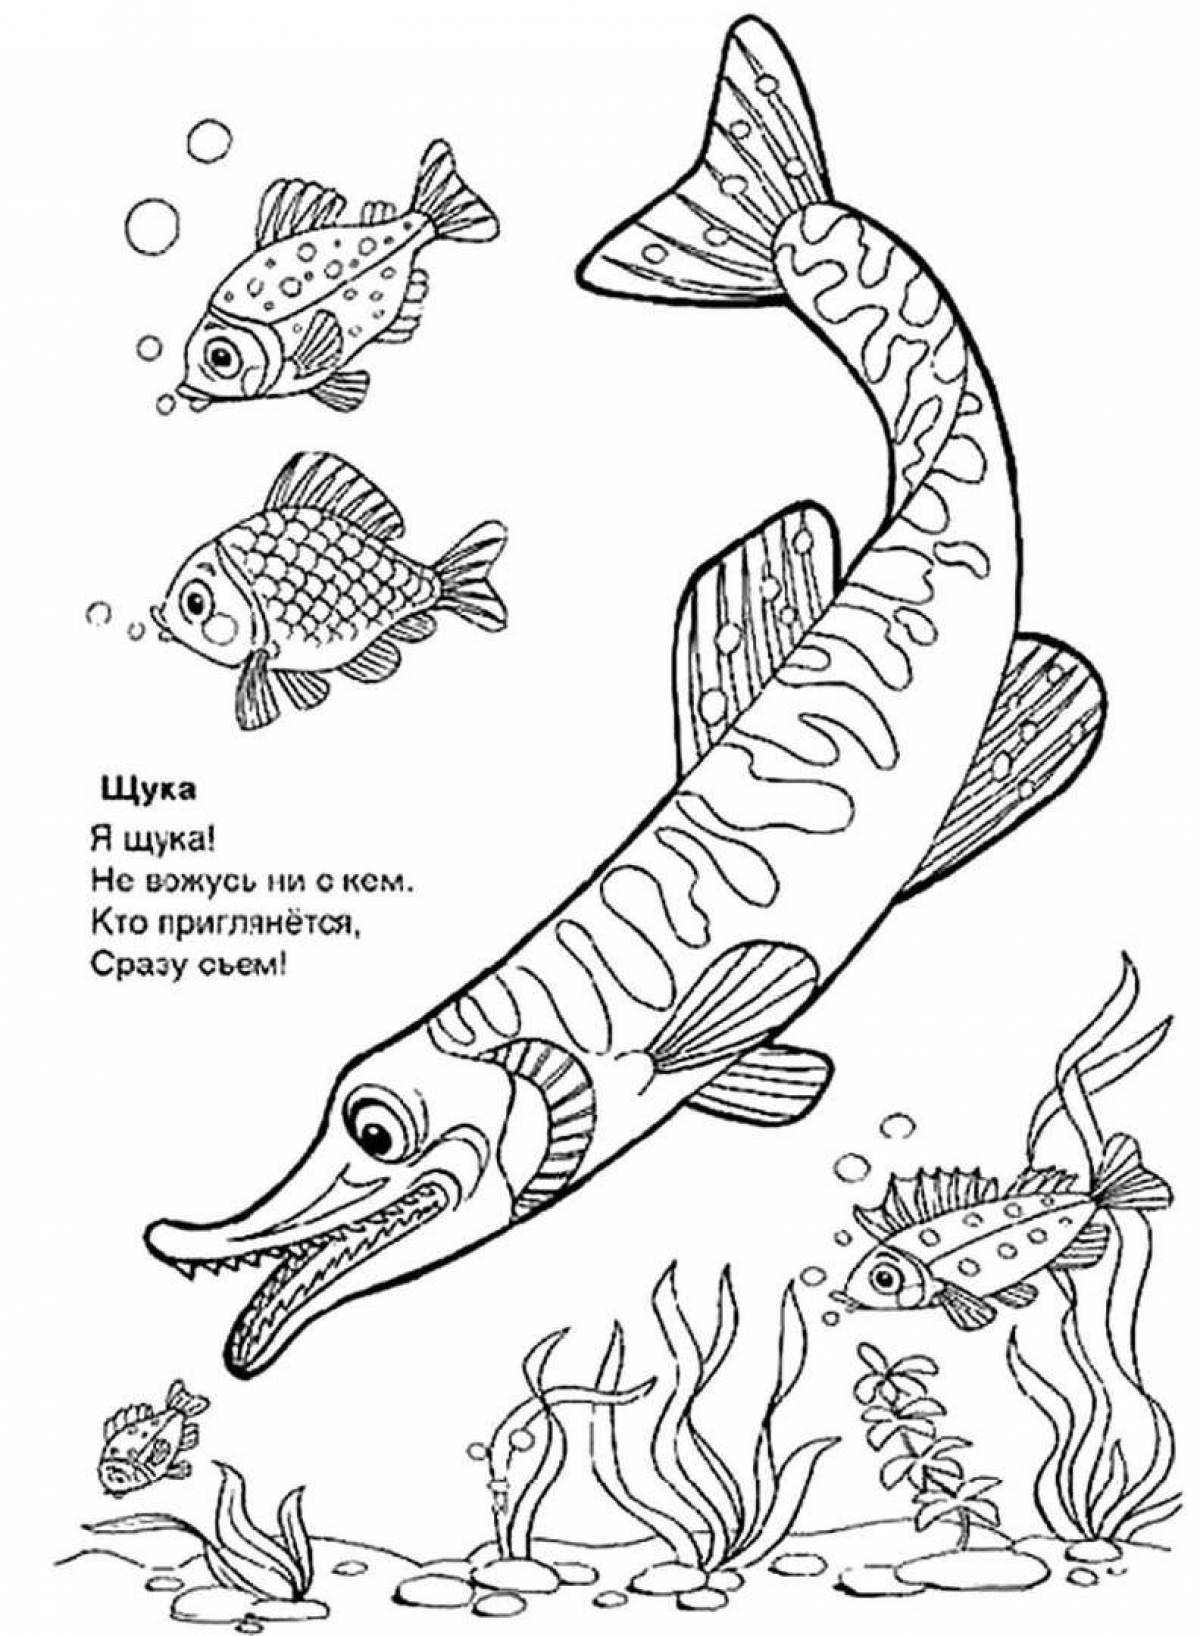 Awesome pike coloring page for little ones